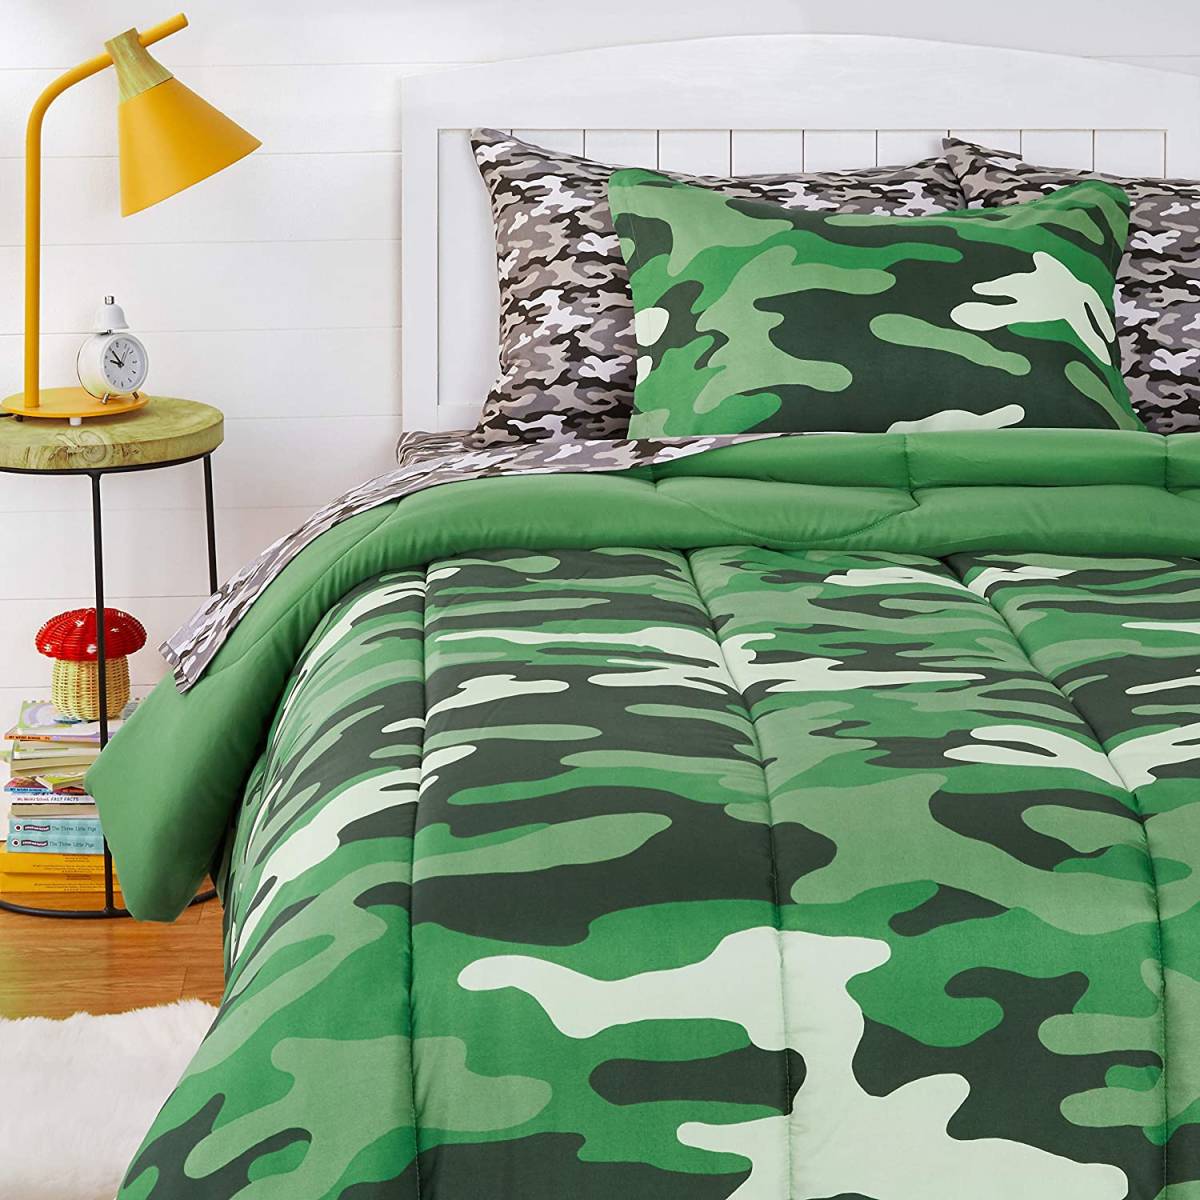  free shipping new goods Amazon Basic quilt bedding set Kids for microfibre material camouflage k roots in 